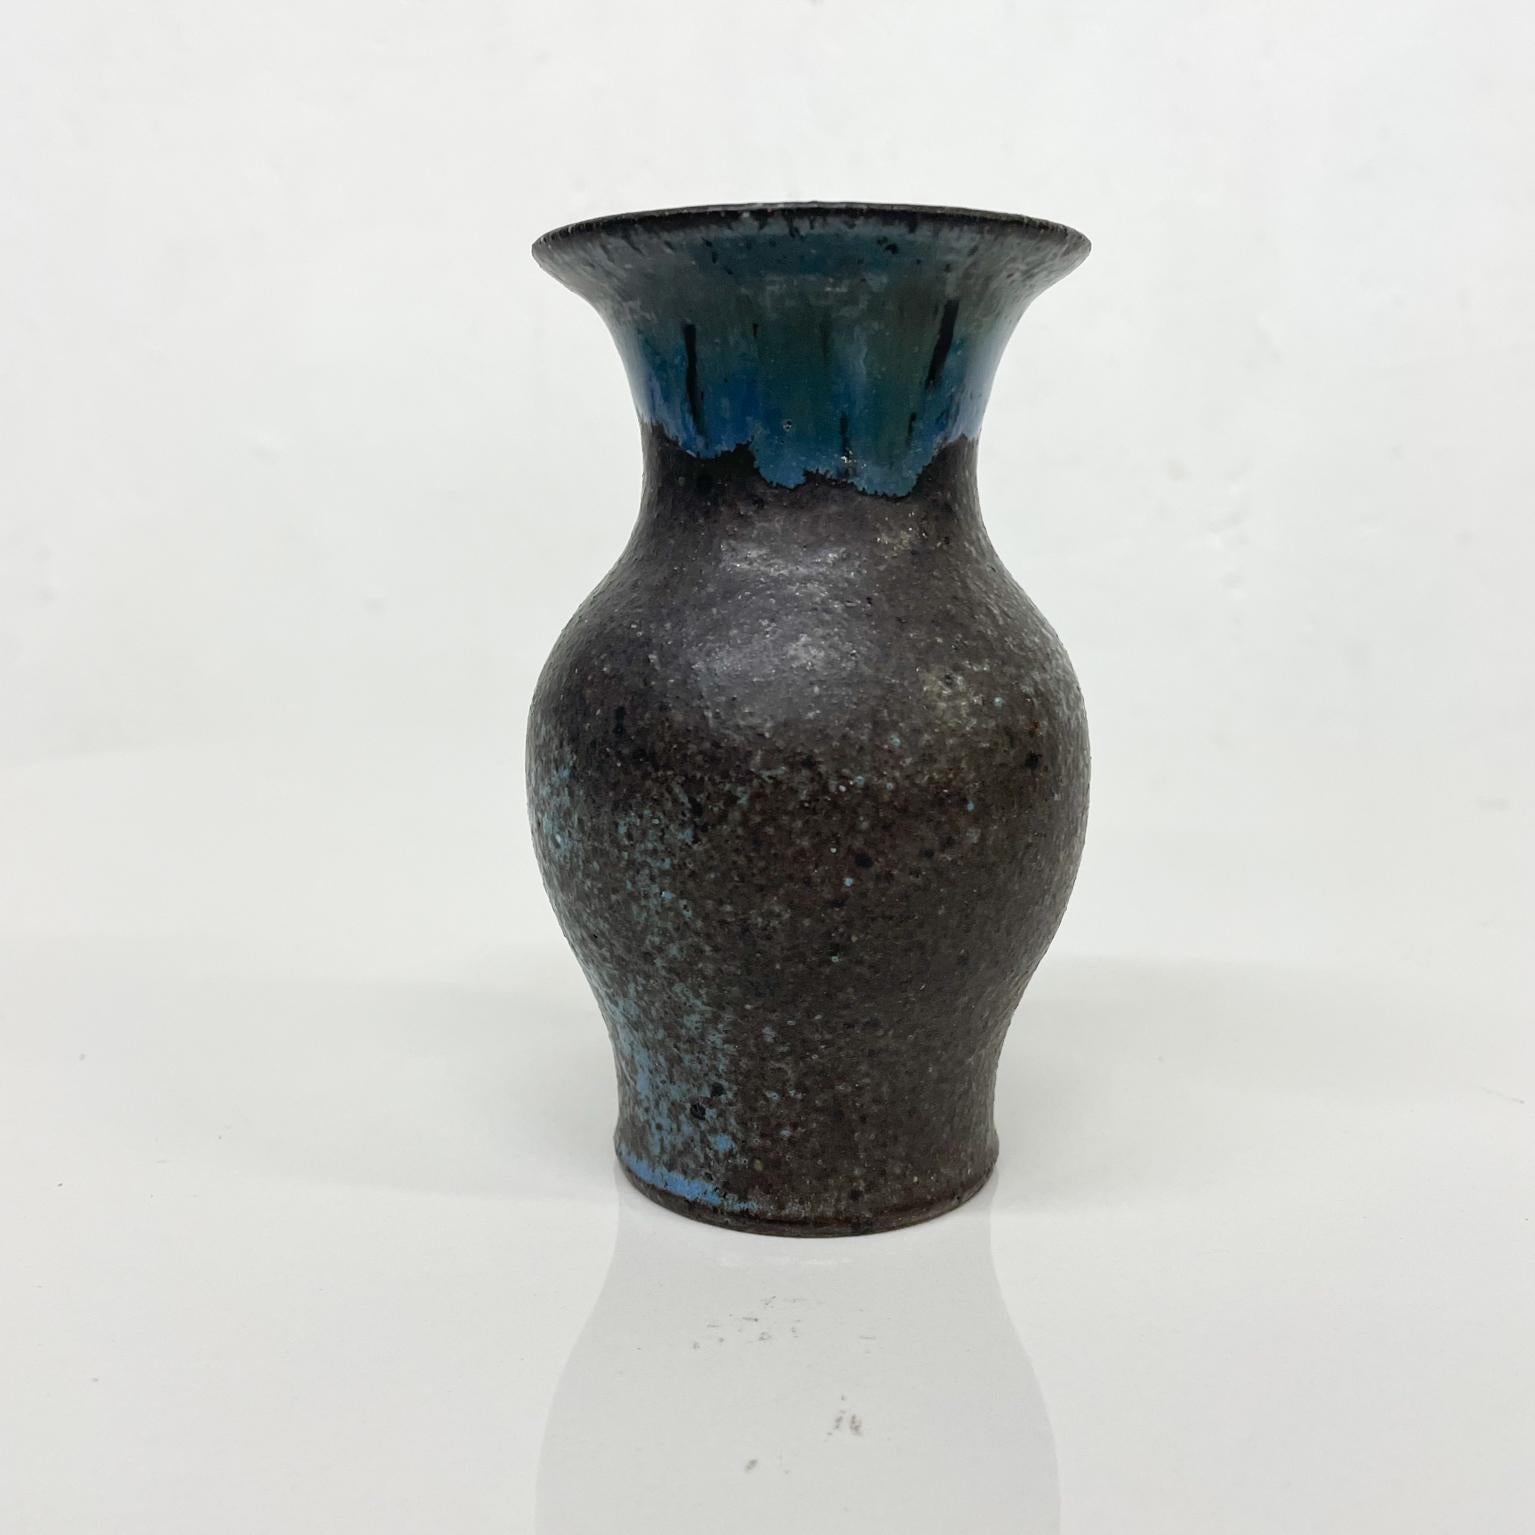 Artful Tiny Weed Pot Bud Vase Draped Blue Glaze on Black 1970s Modern In Good Condition For Sale In Chula Vista, CA